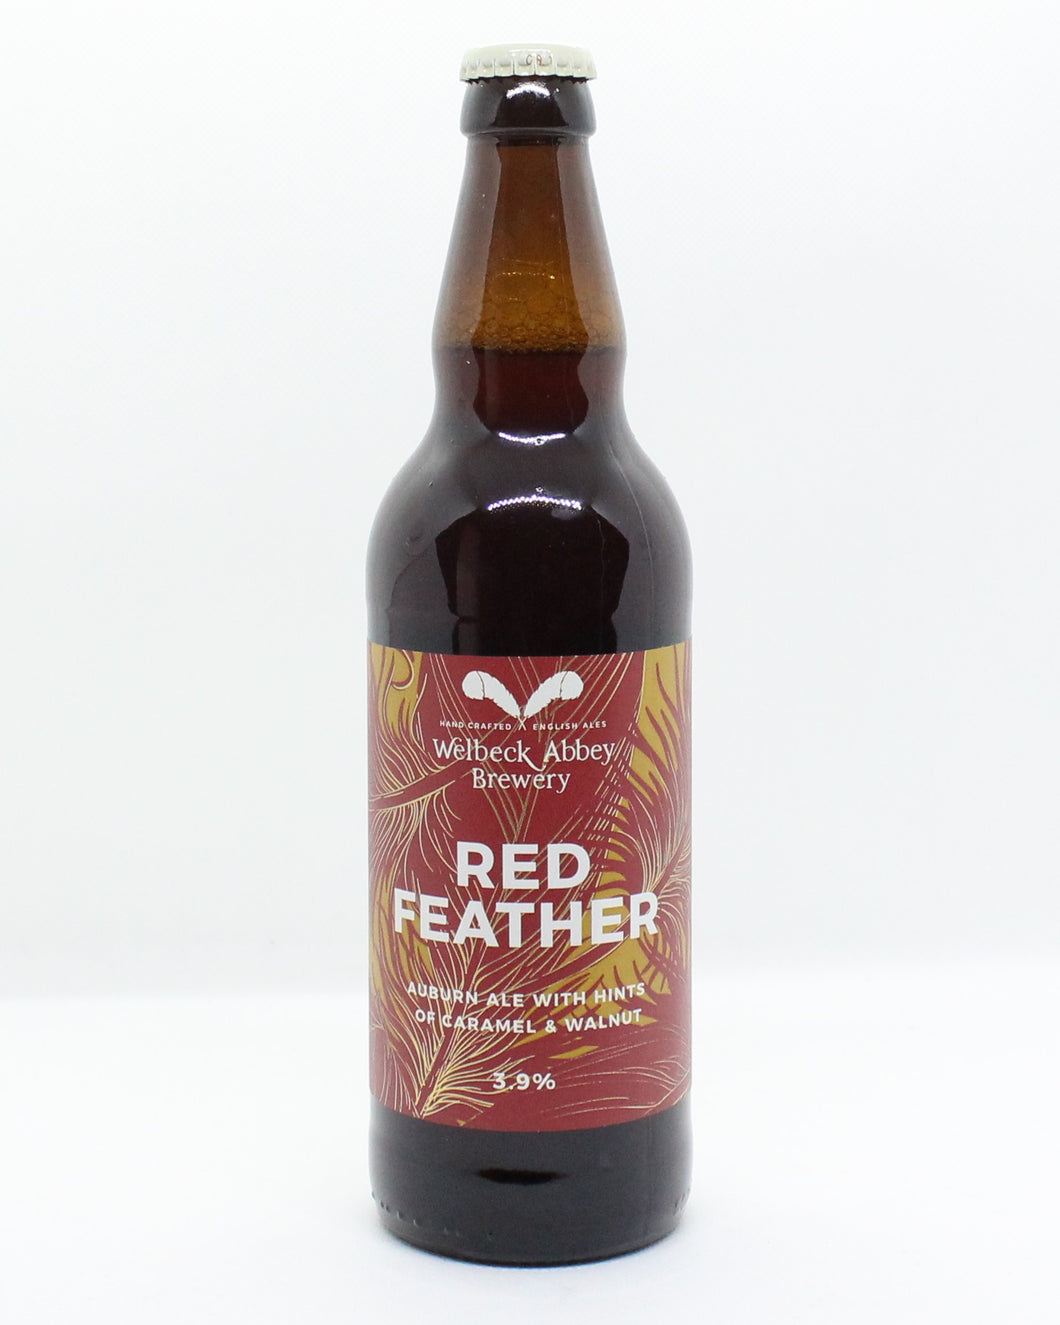 Welbeck Abbey Red Feather